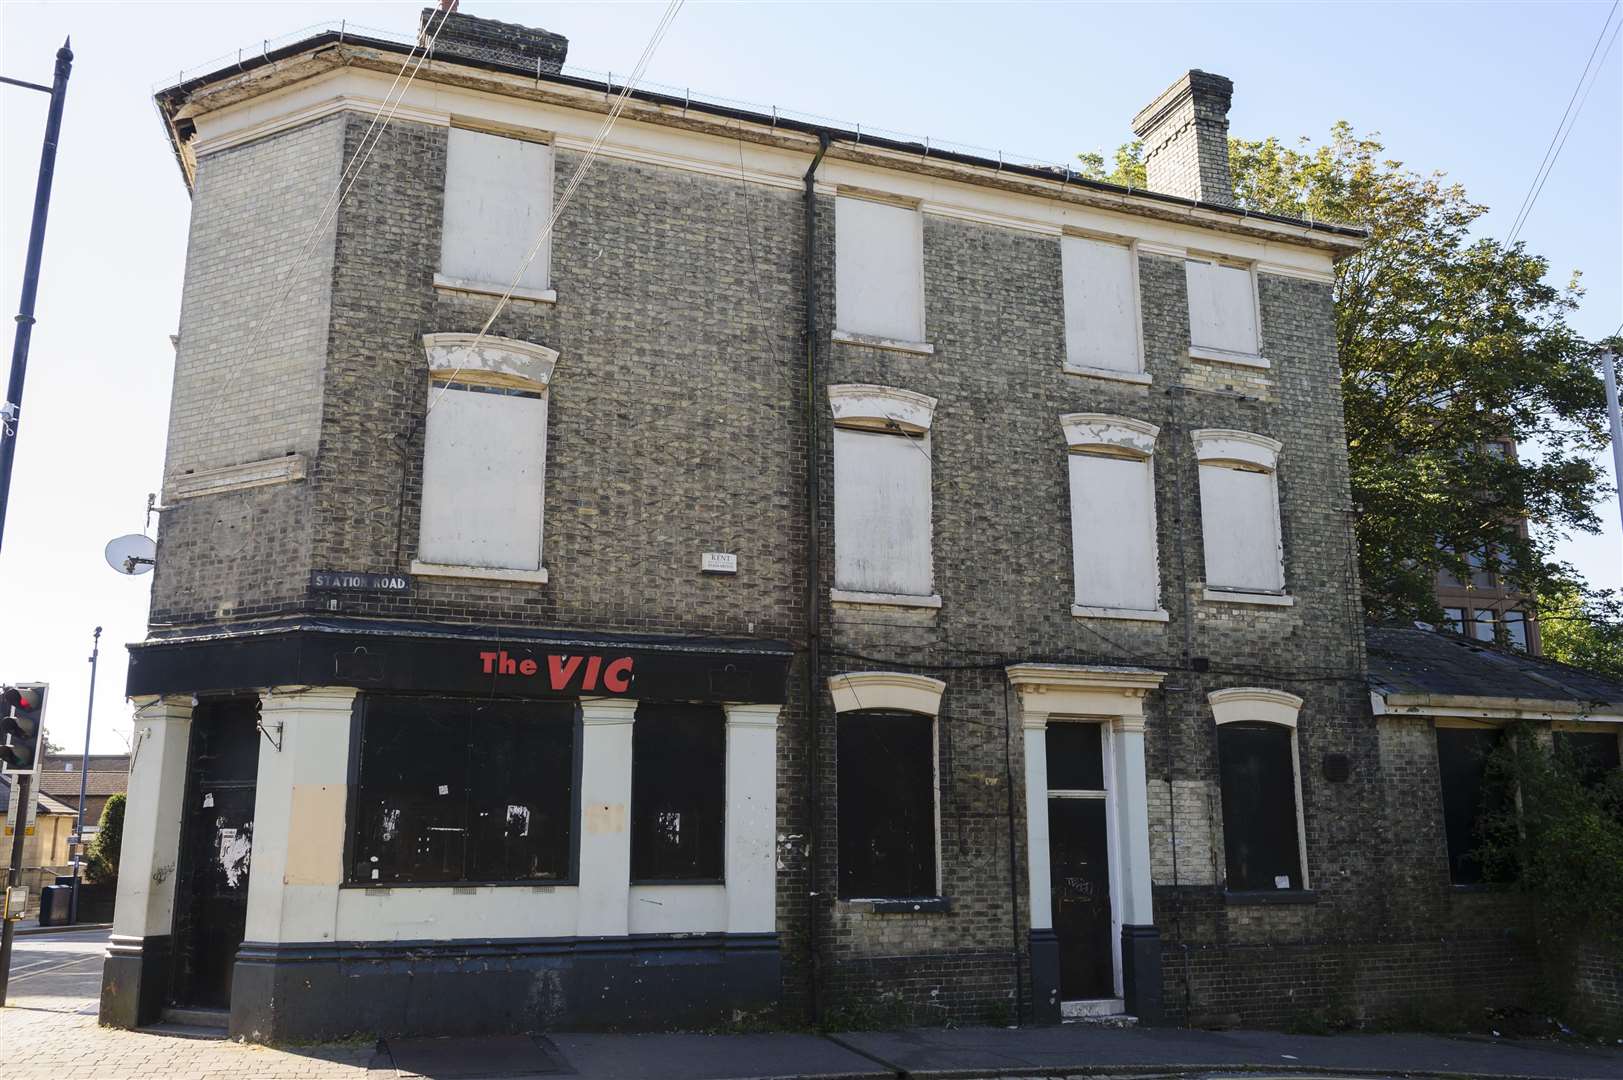 The Victoria Pub (The Vic) is set to be demolished